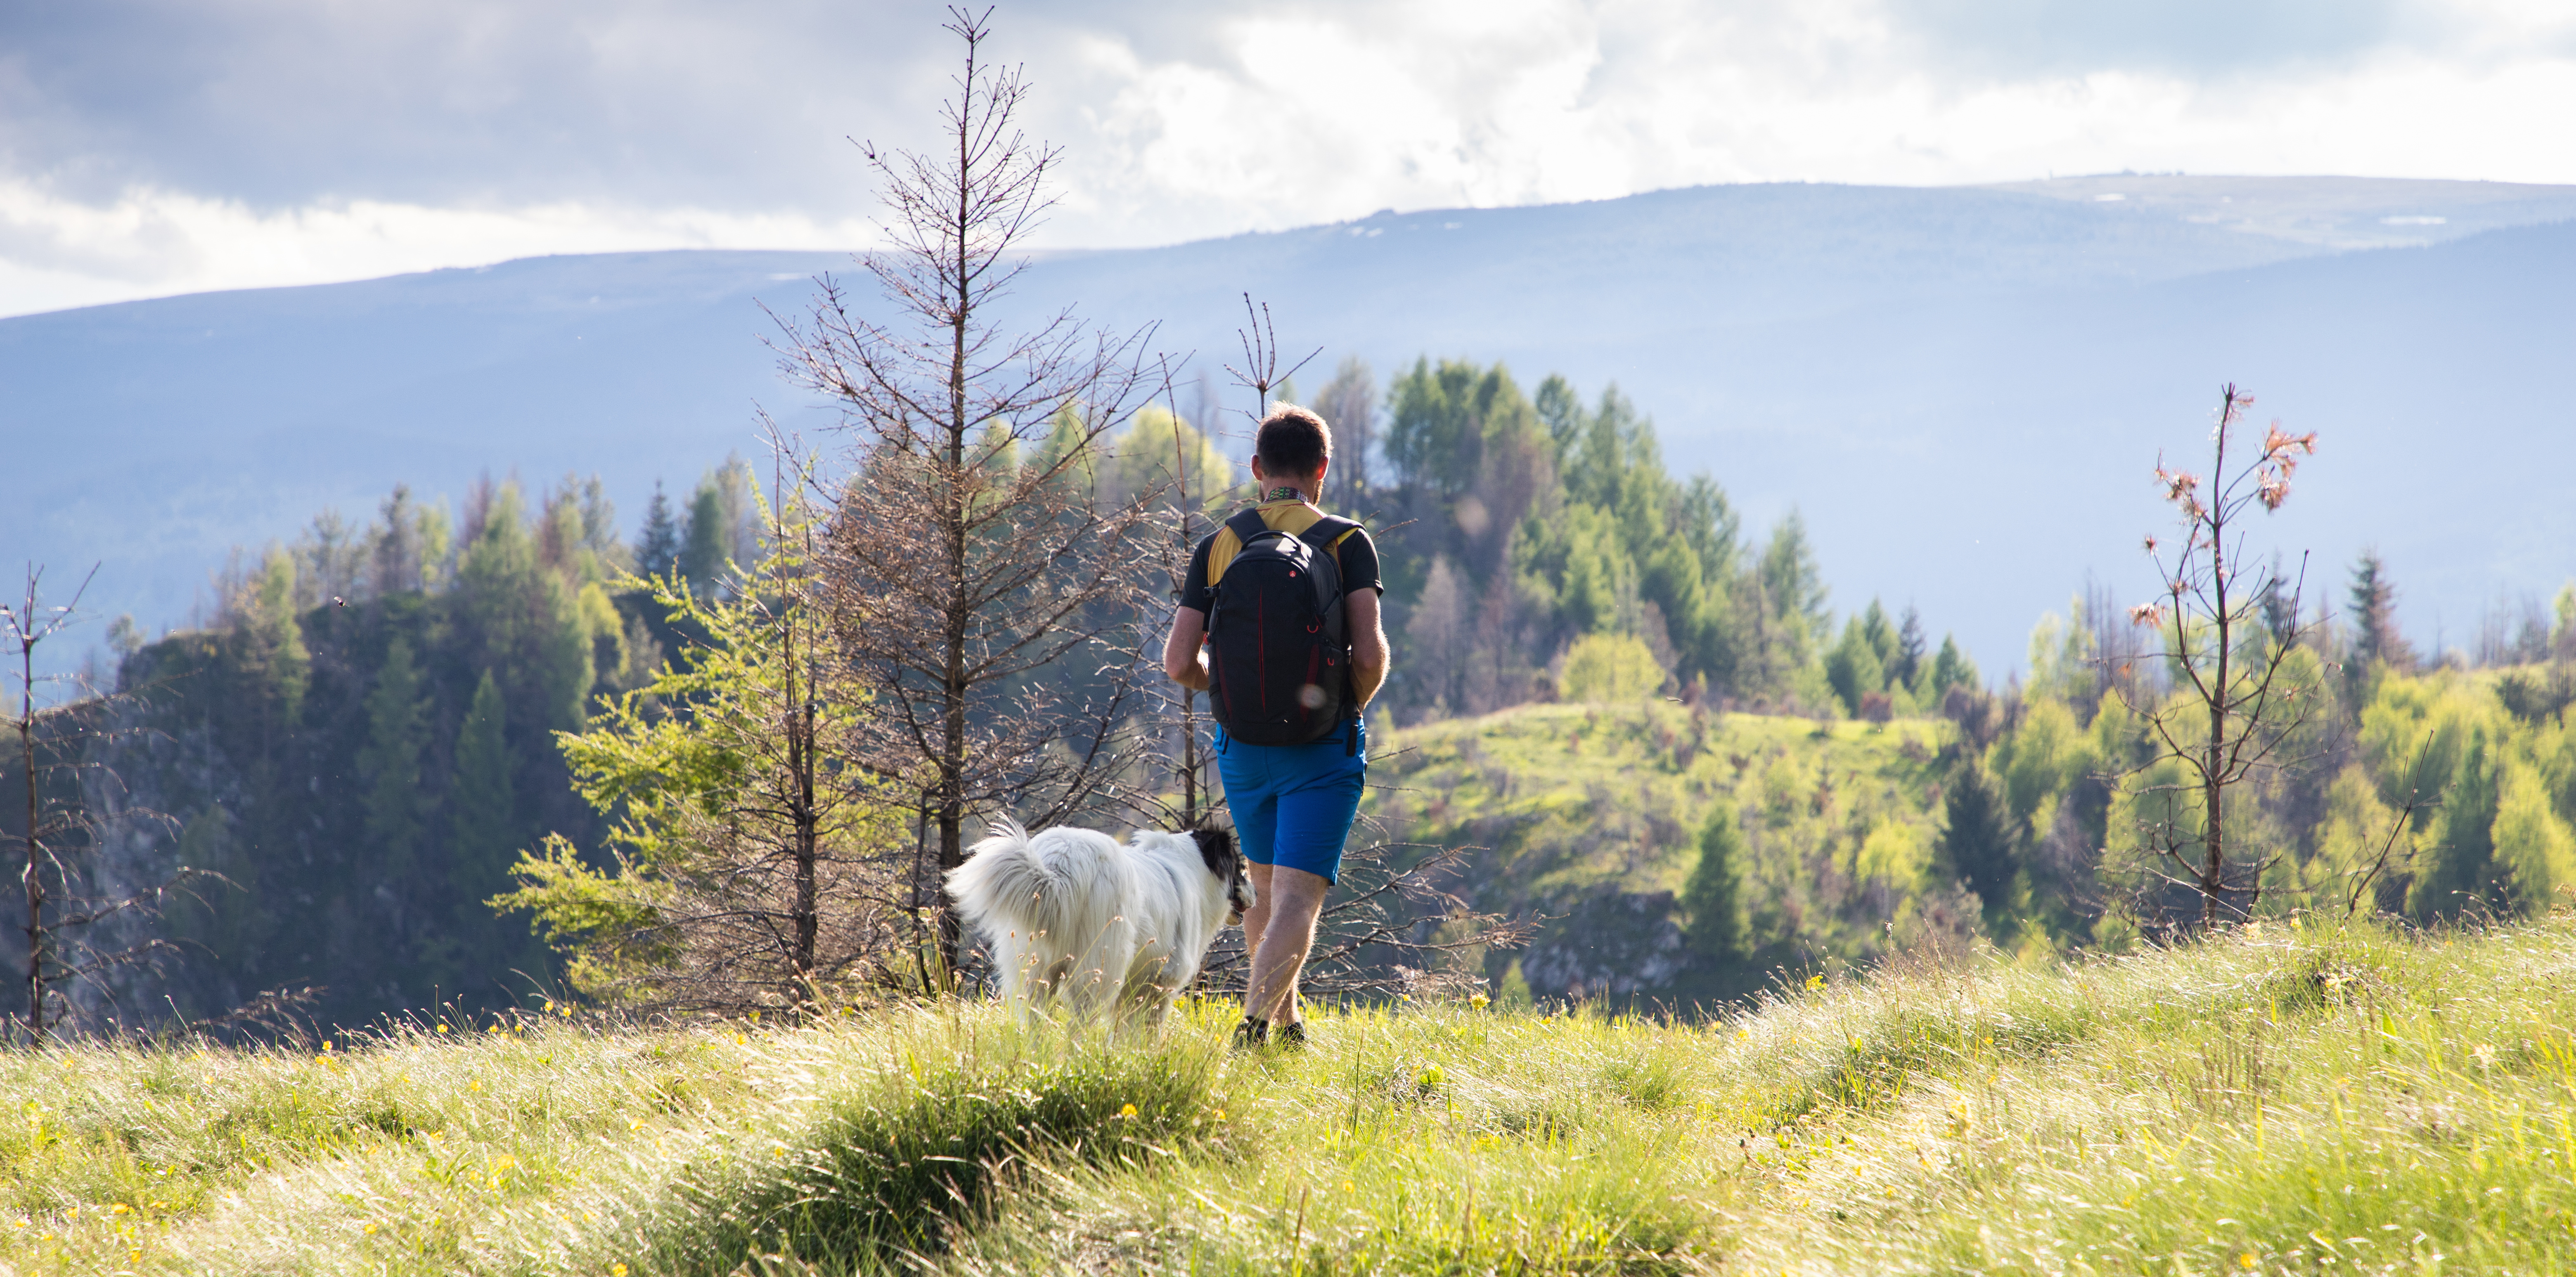 Man and dog walking away from the camera down a hiking trail into the mountains on a sunny day.